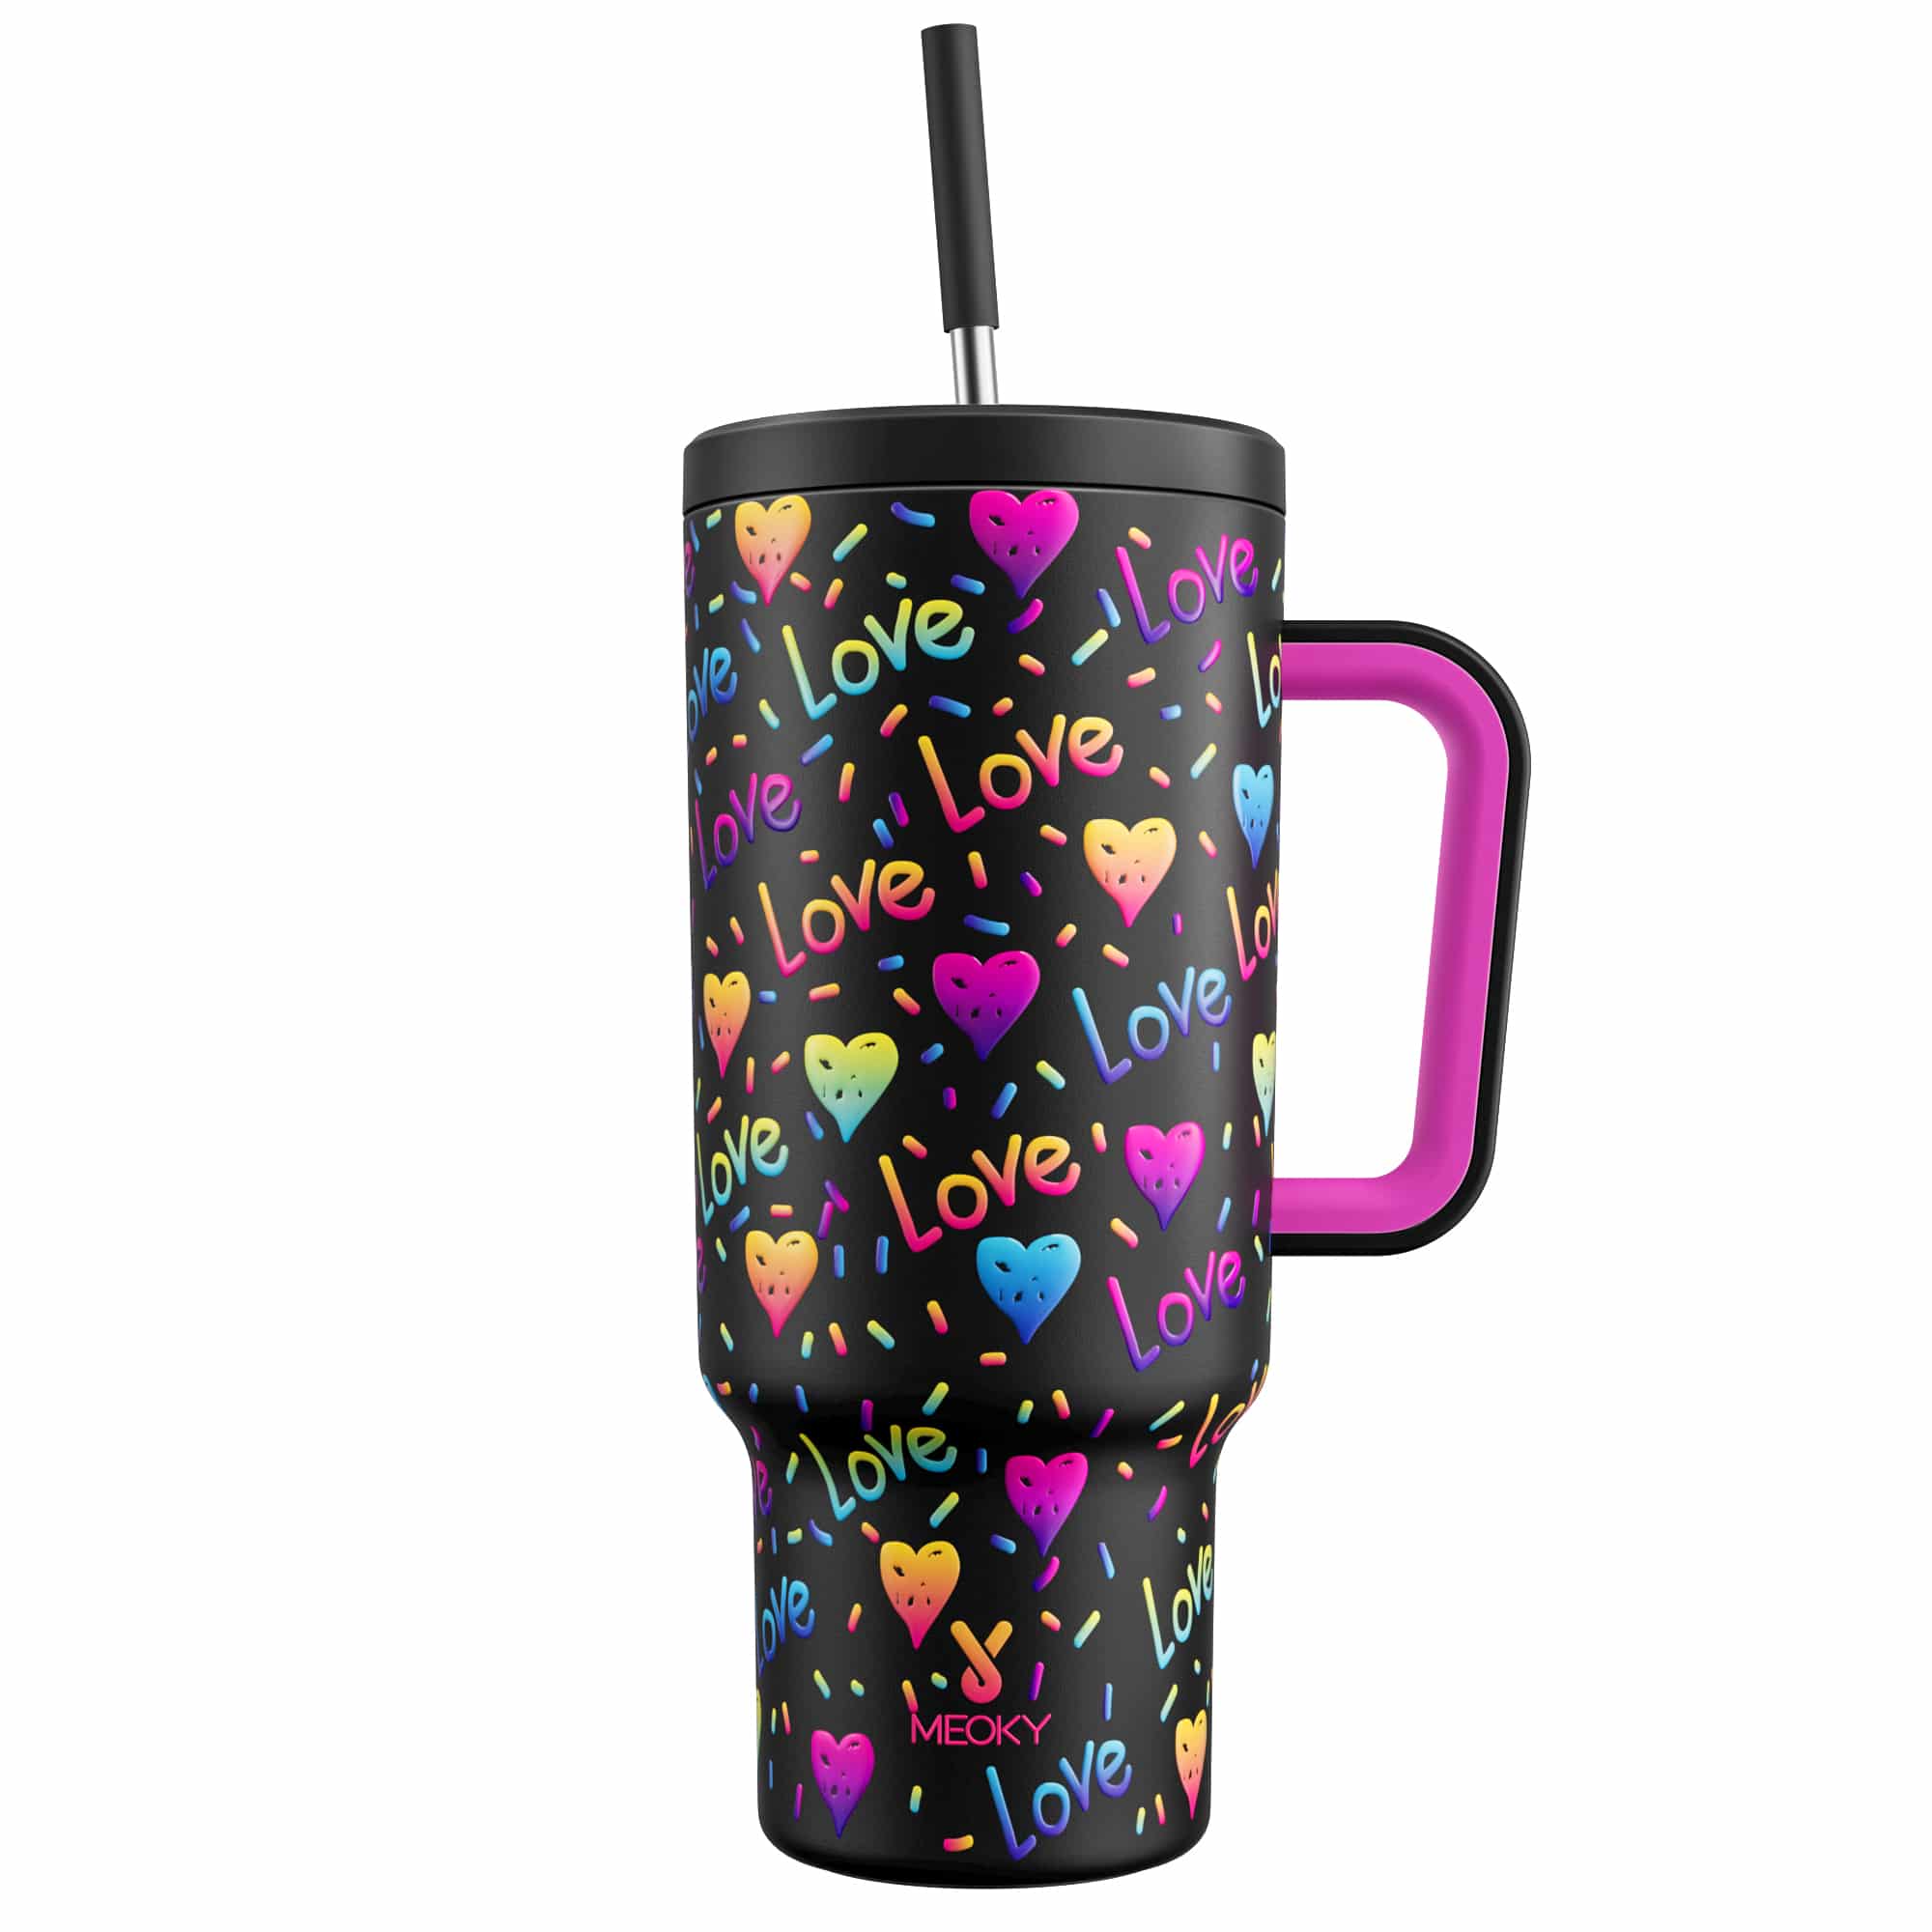 Meoky 40oz Tumbler with Handle and Straw Lid -NoirLove